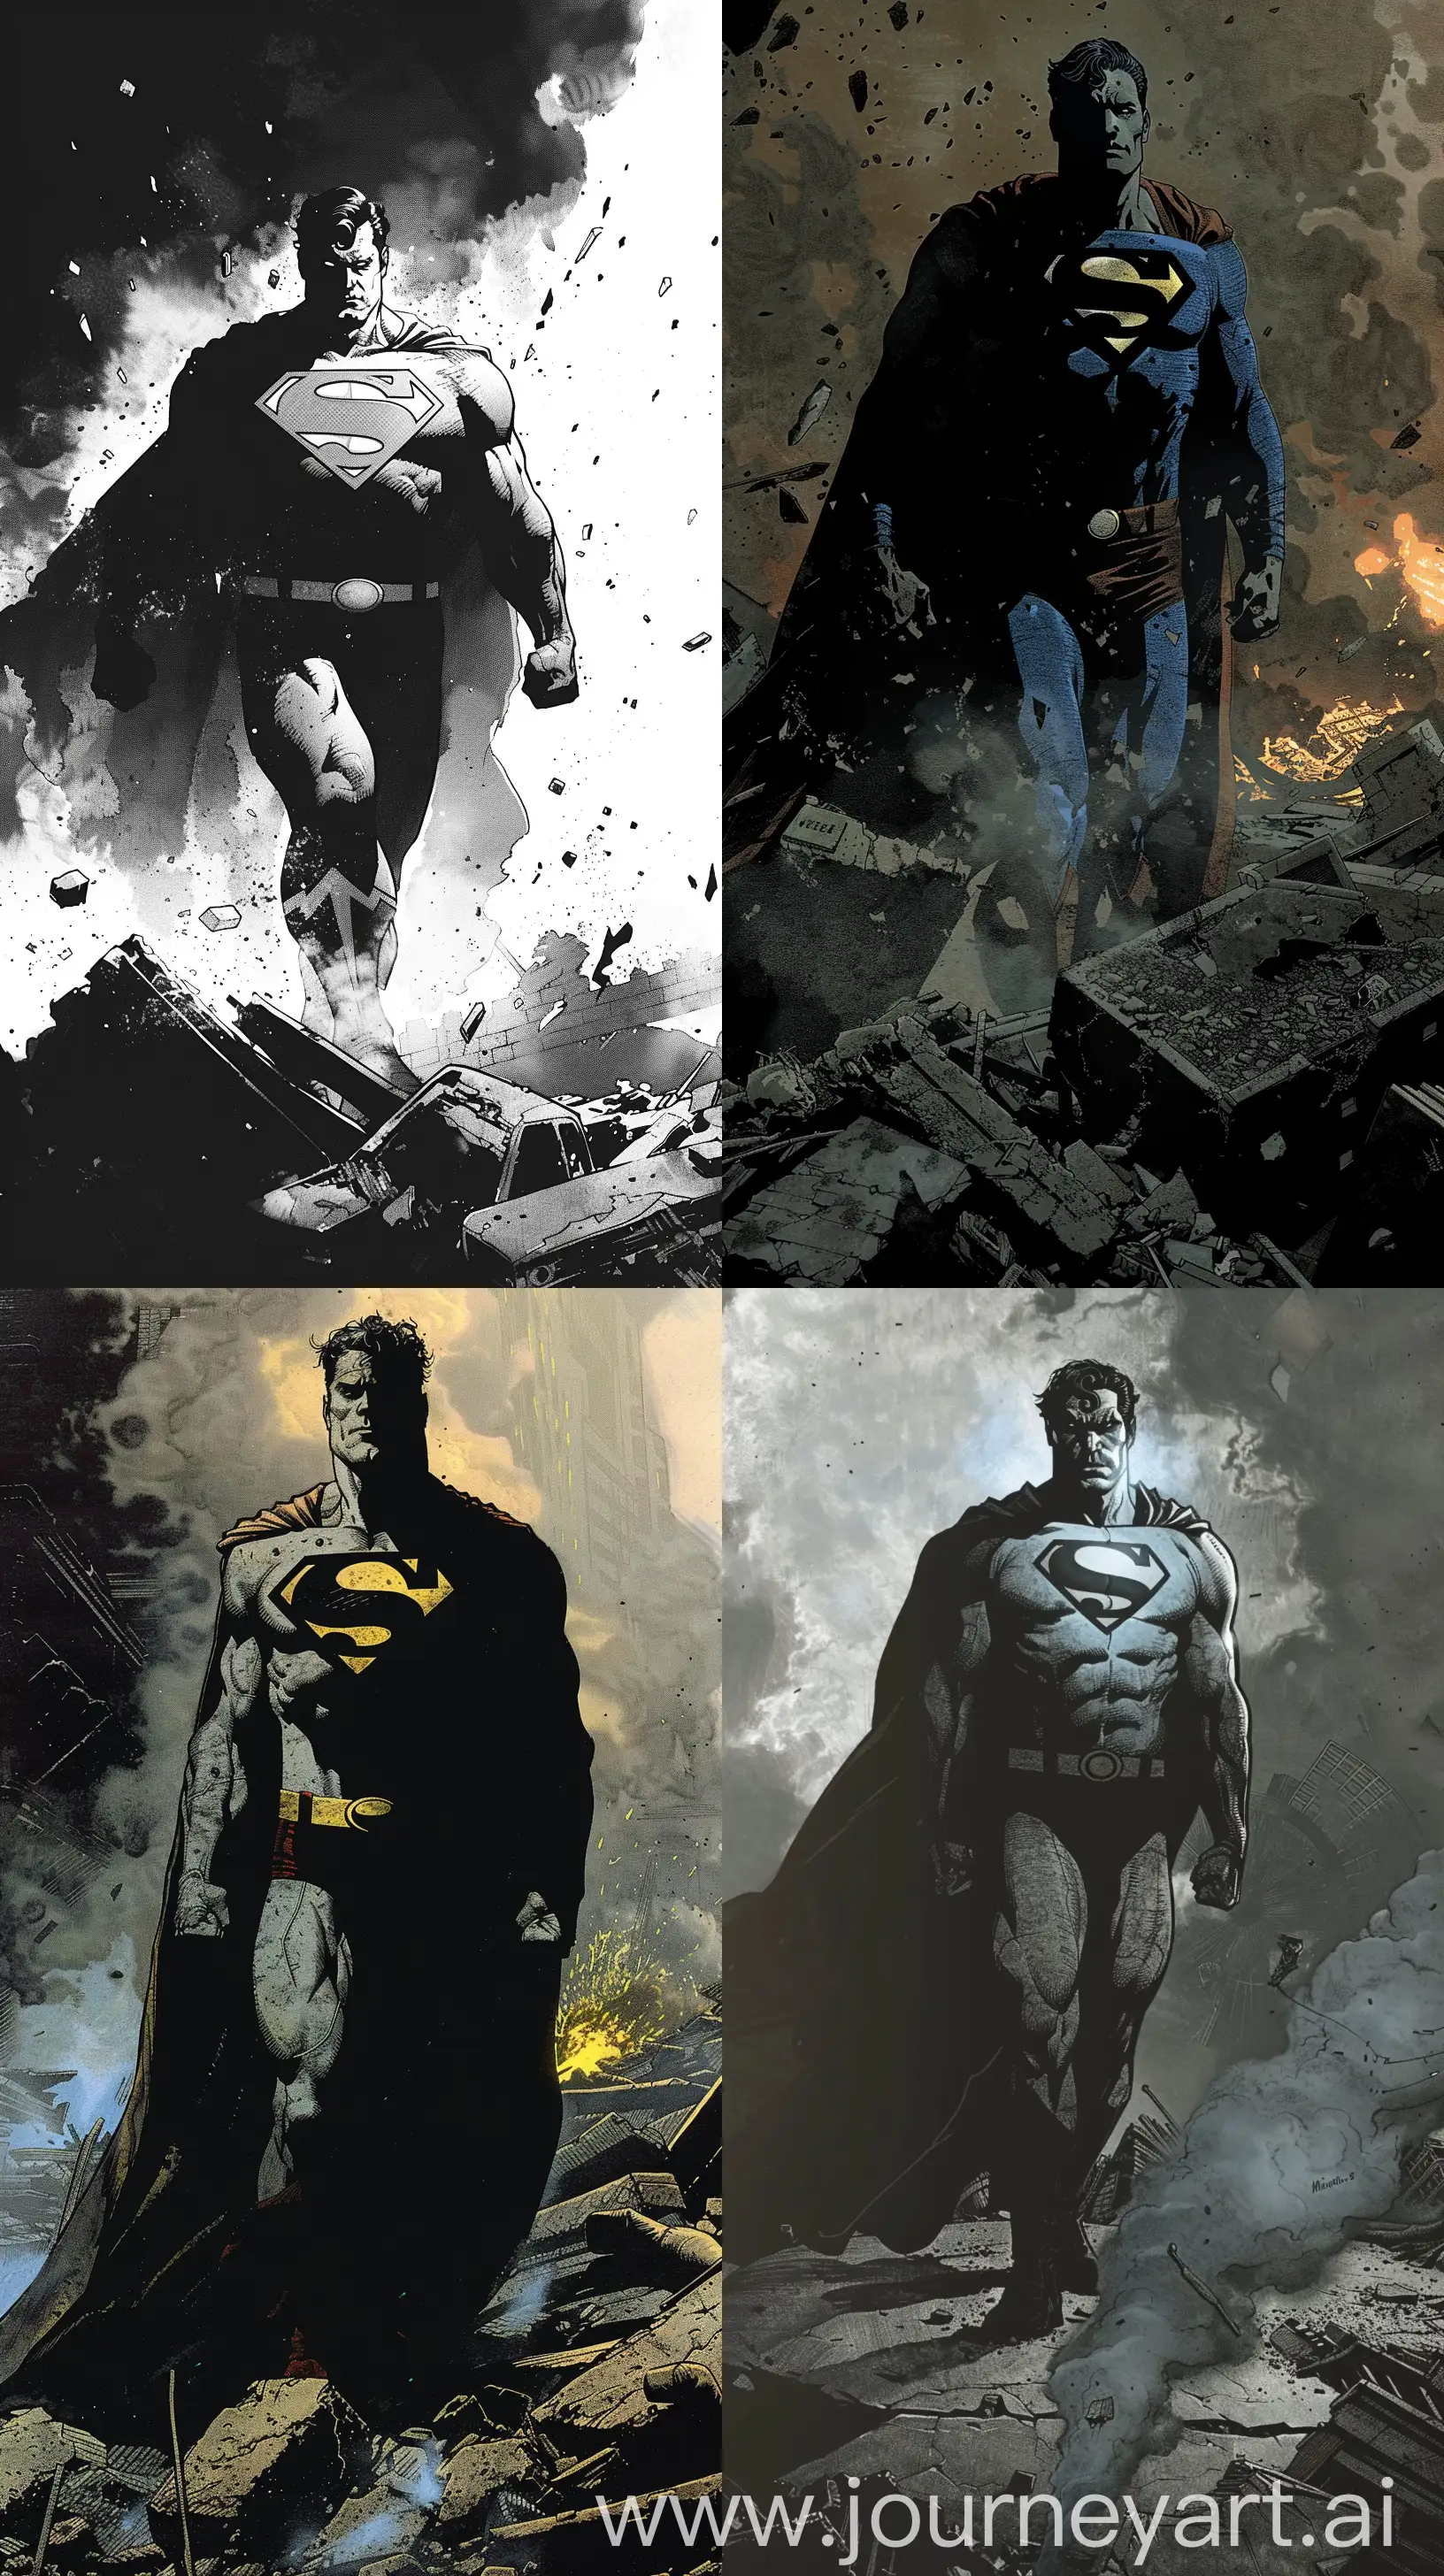 Imagine Superman as interpreted by Mike Mignola, standing heroically amidst the ruins of Metropolis. The scene is cast in deep shadow, with only the emblem on his chest catching the faint glow of a distant fire. His cape billows in a smoky wind, and his eyes shine with a determined light, ready to take flight and restore hope to the city --ar 9:16 --v 6